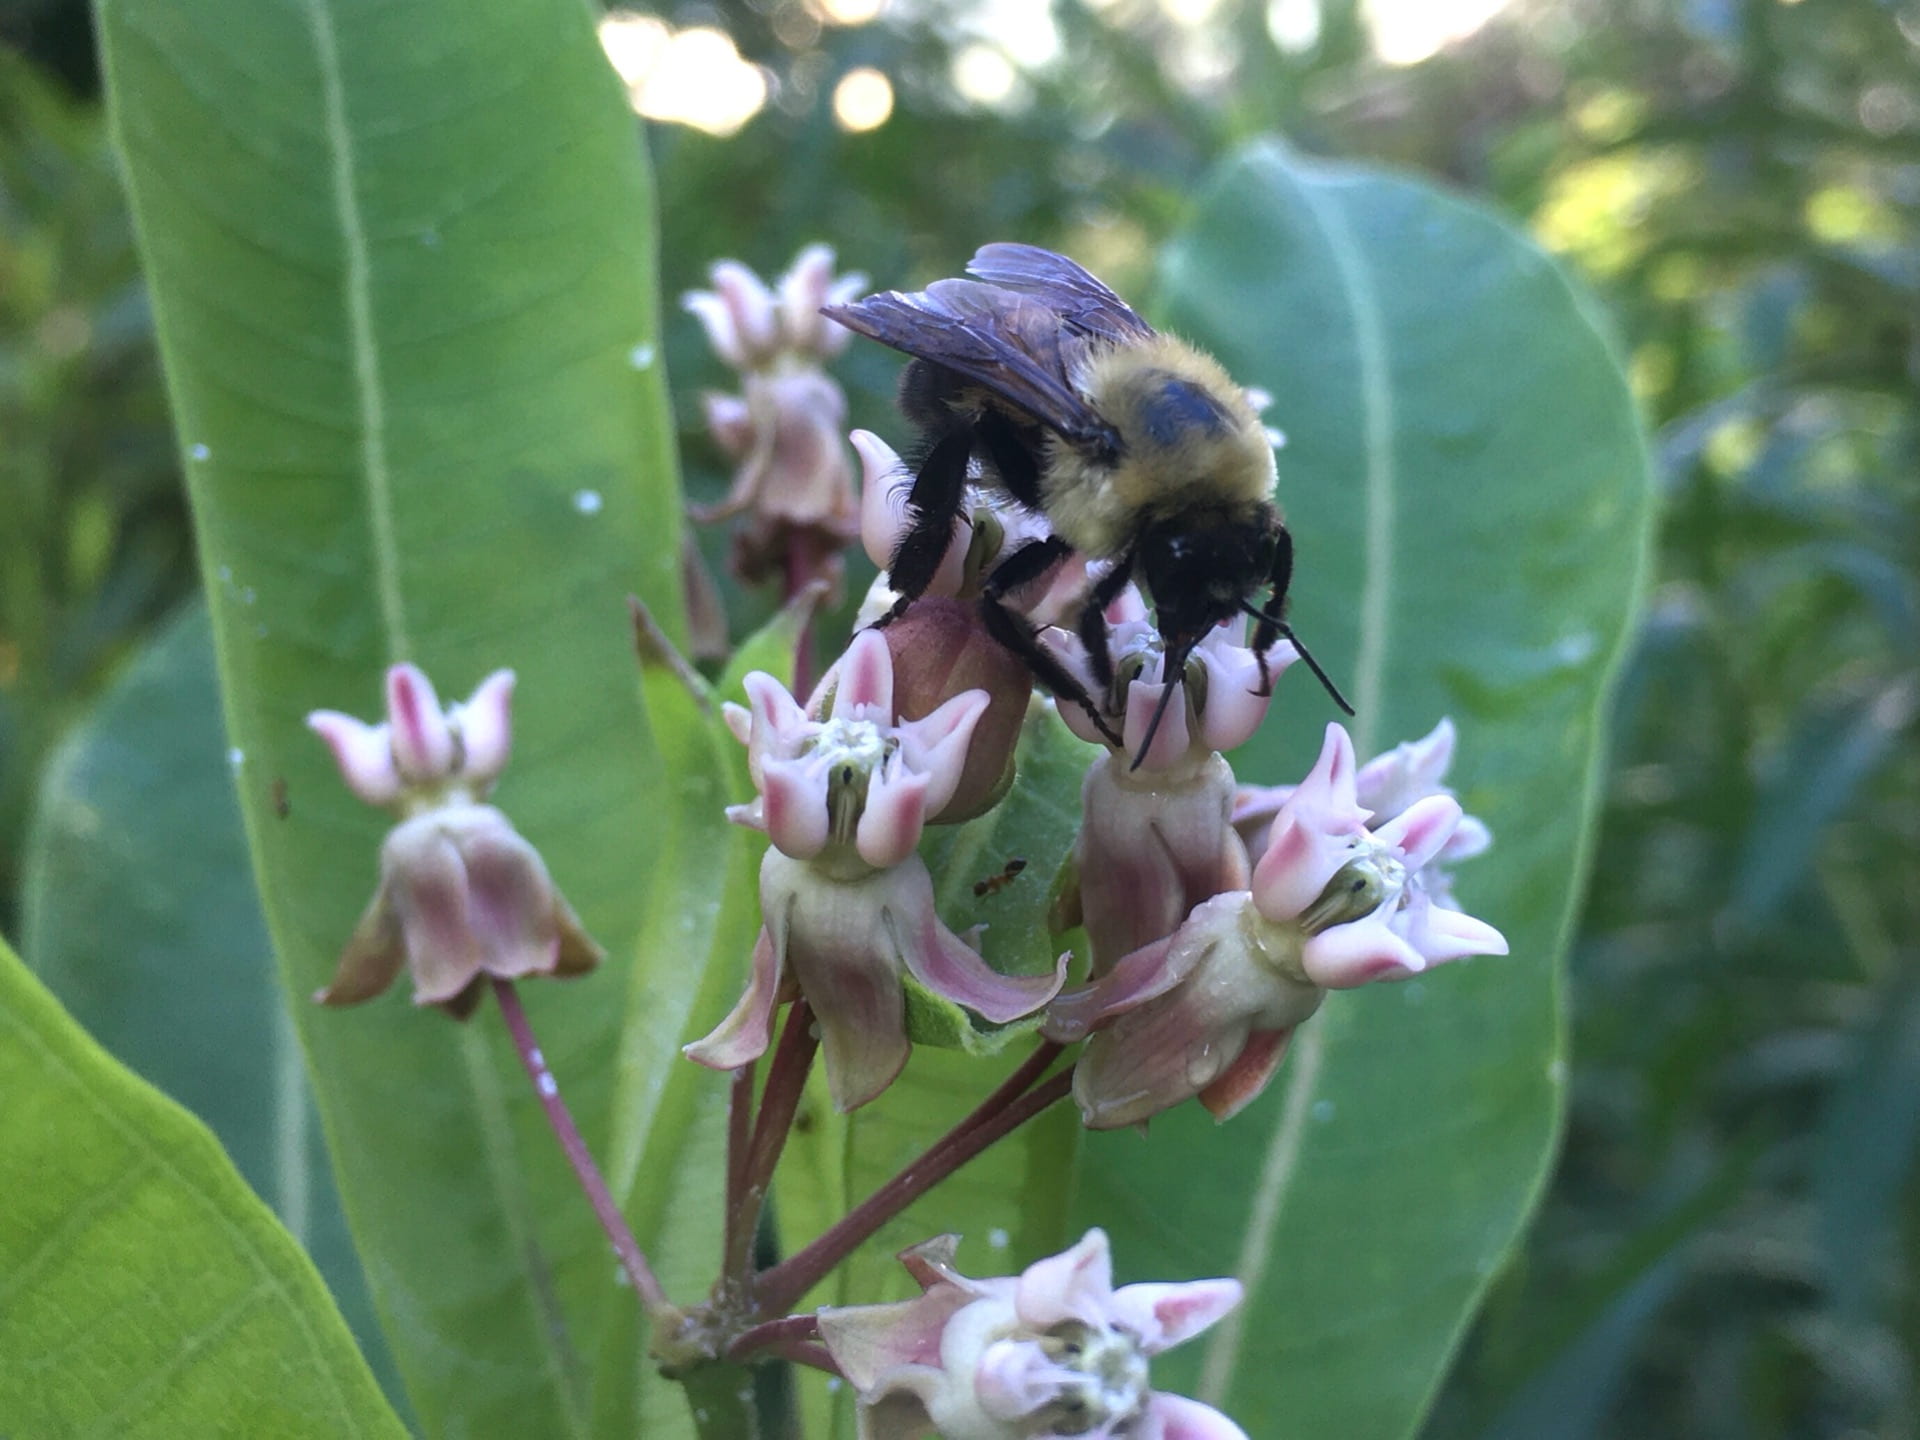 Bumble bees, Bombus spp., gather nectar from the flowers of the common milkweed, Asclepias syriaca.